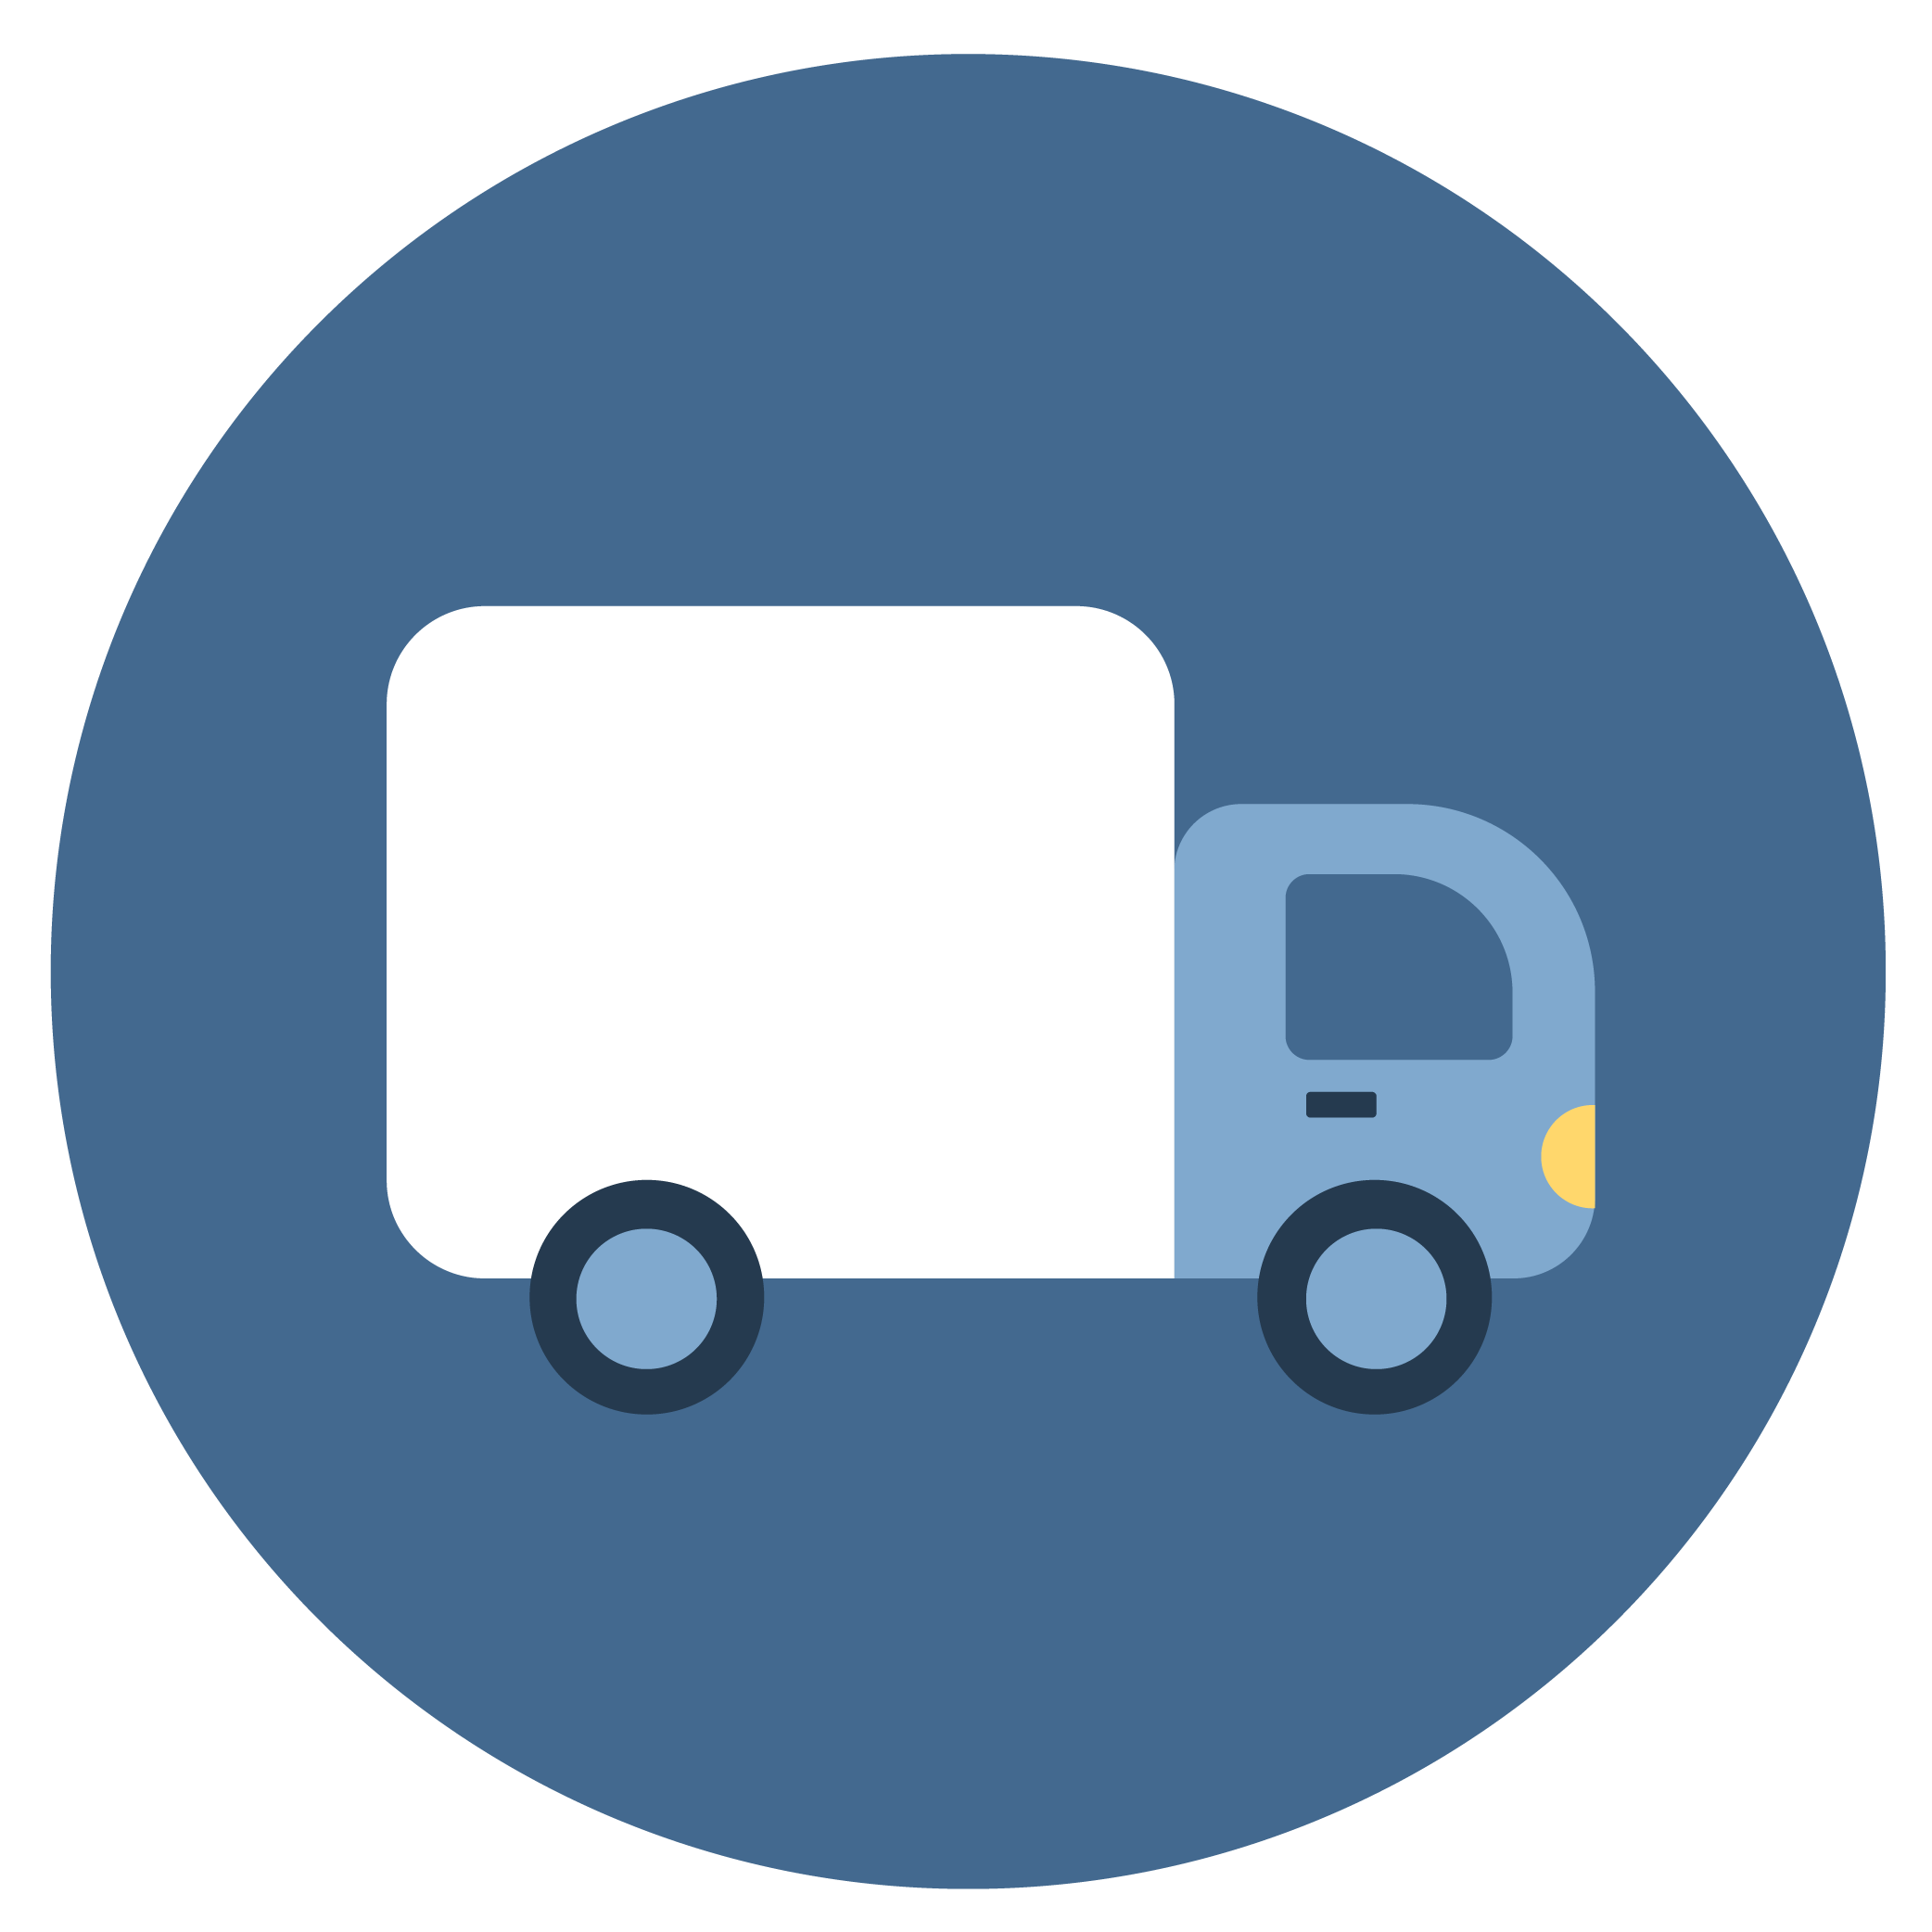 Disposal truck icon. Click to go to our Dispose, Recycle, Treat webpage.